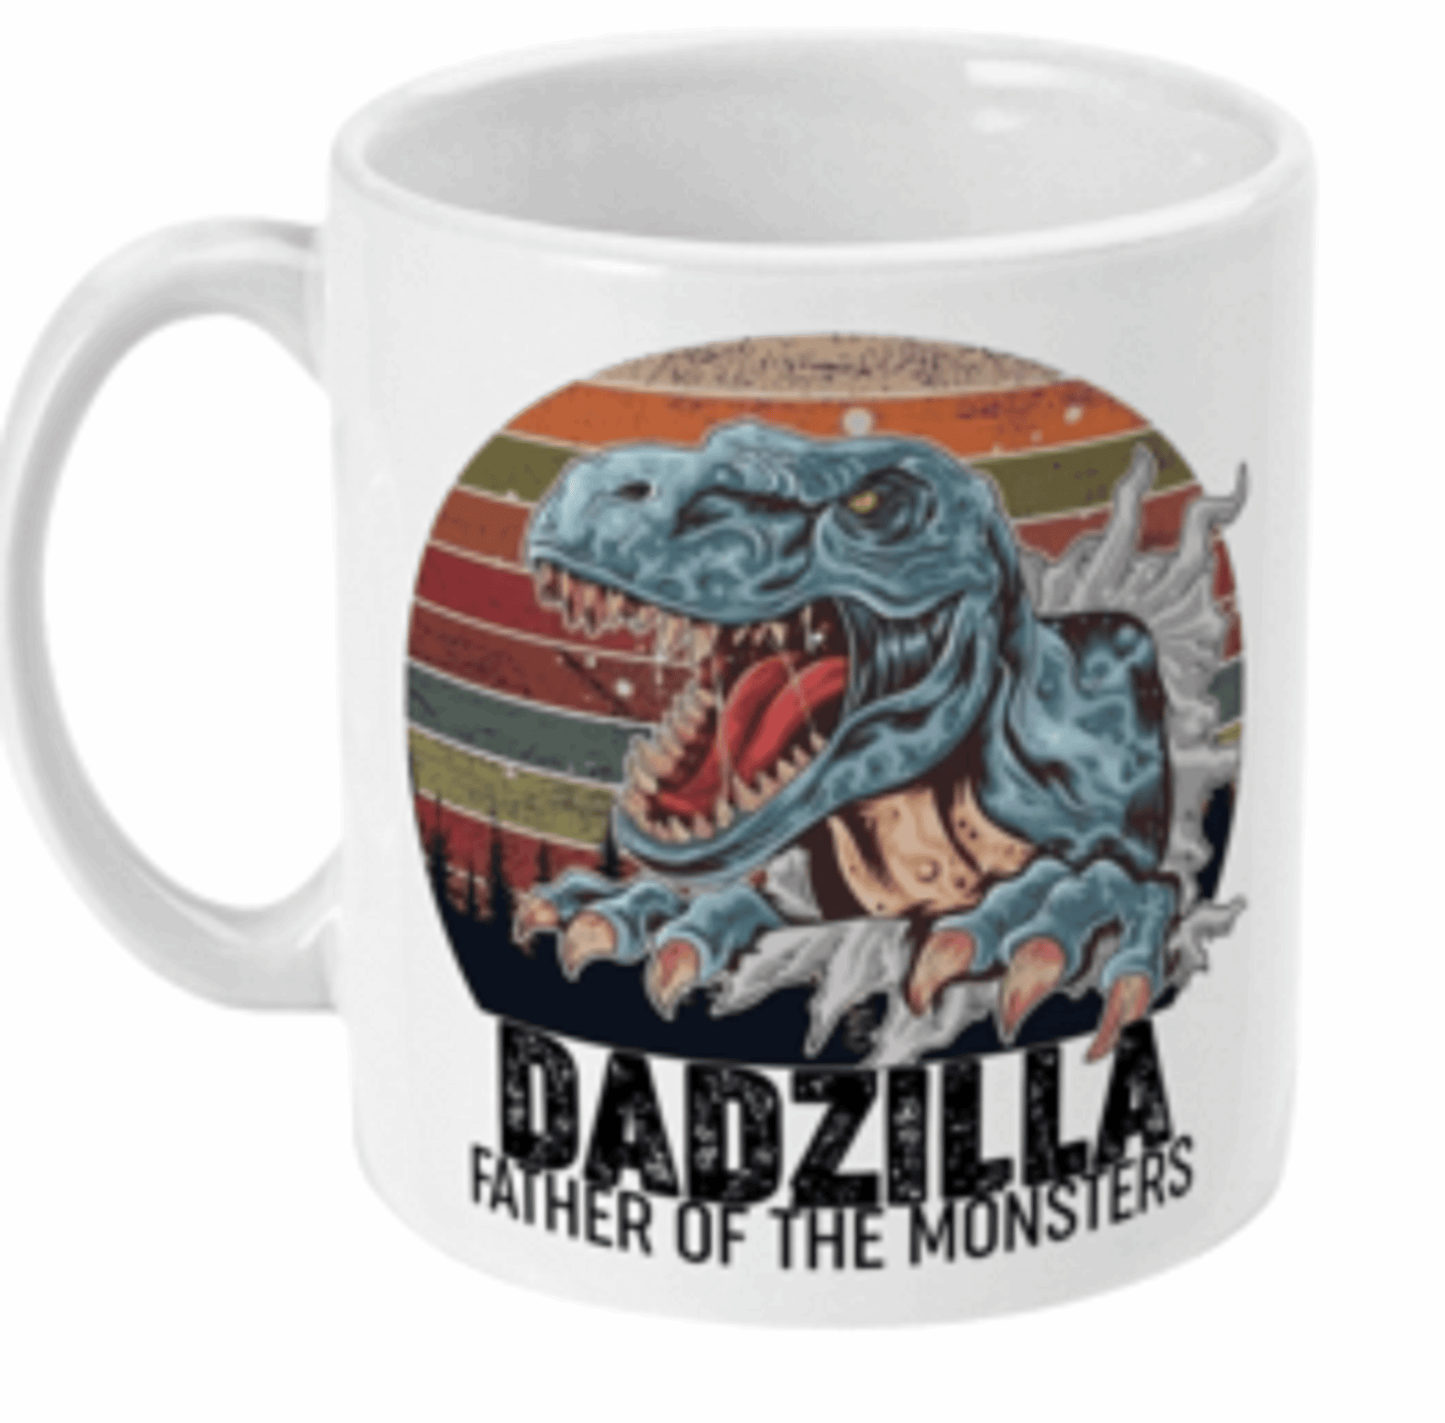  Dadzilla Father of the Monsters Coffee Mug by Free Spirit Accessories sold by Free Spirit Accessories